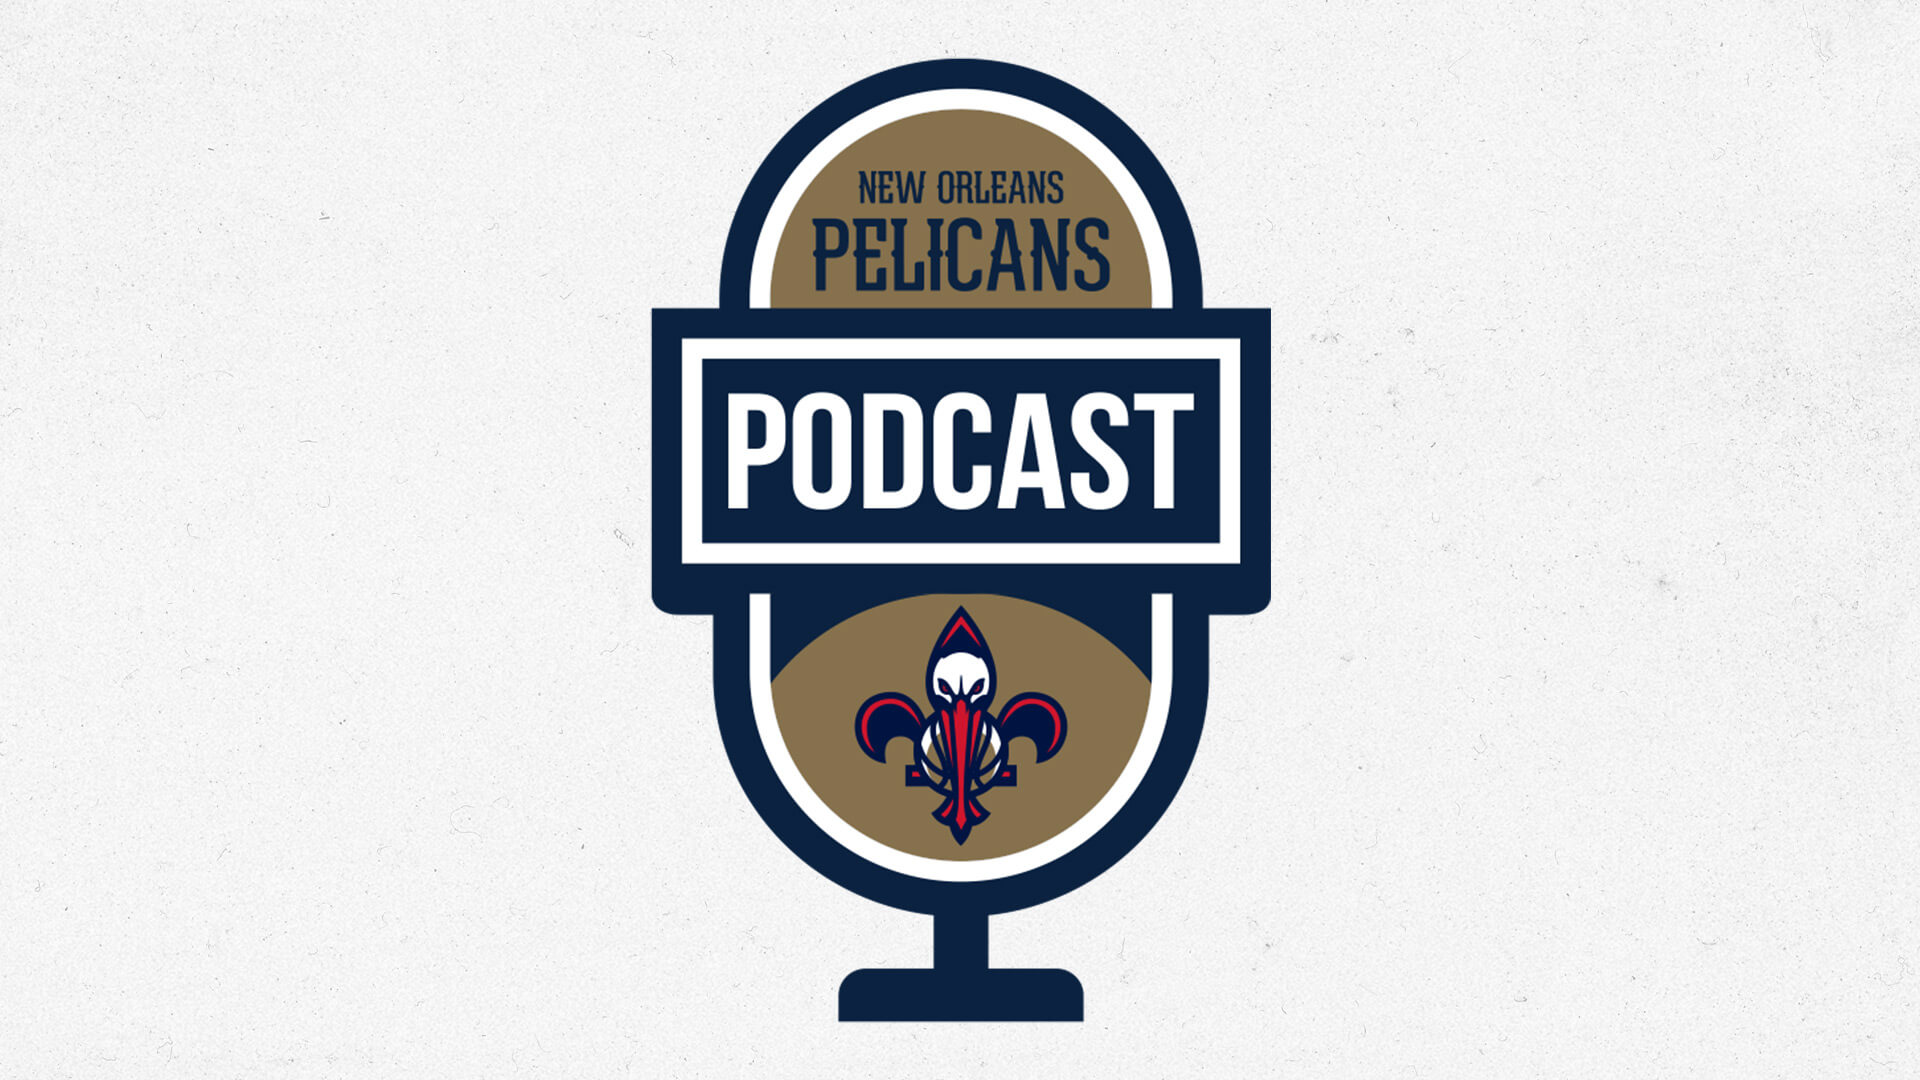 Pelicans vs. Magic preview, look at remaining schedule | Pelicans Podcast